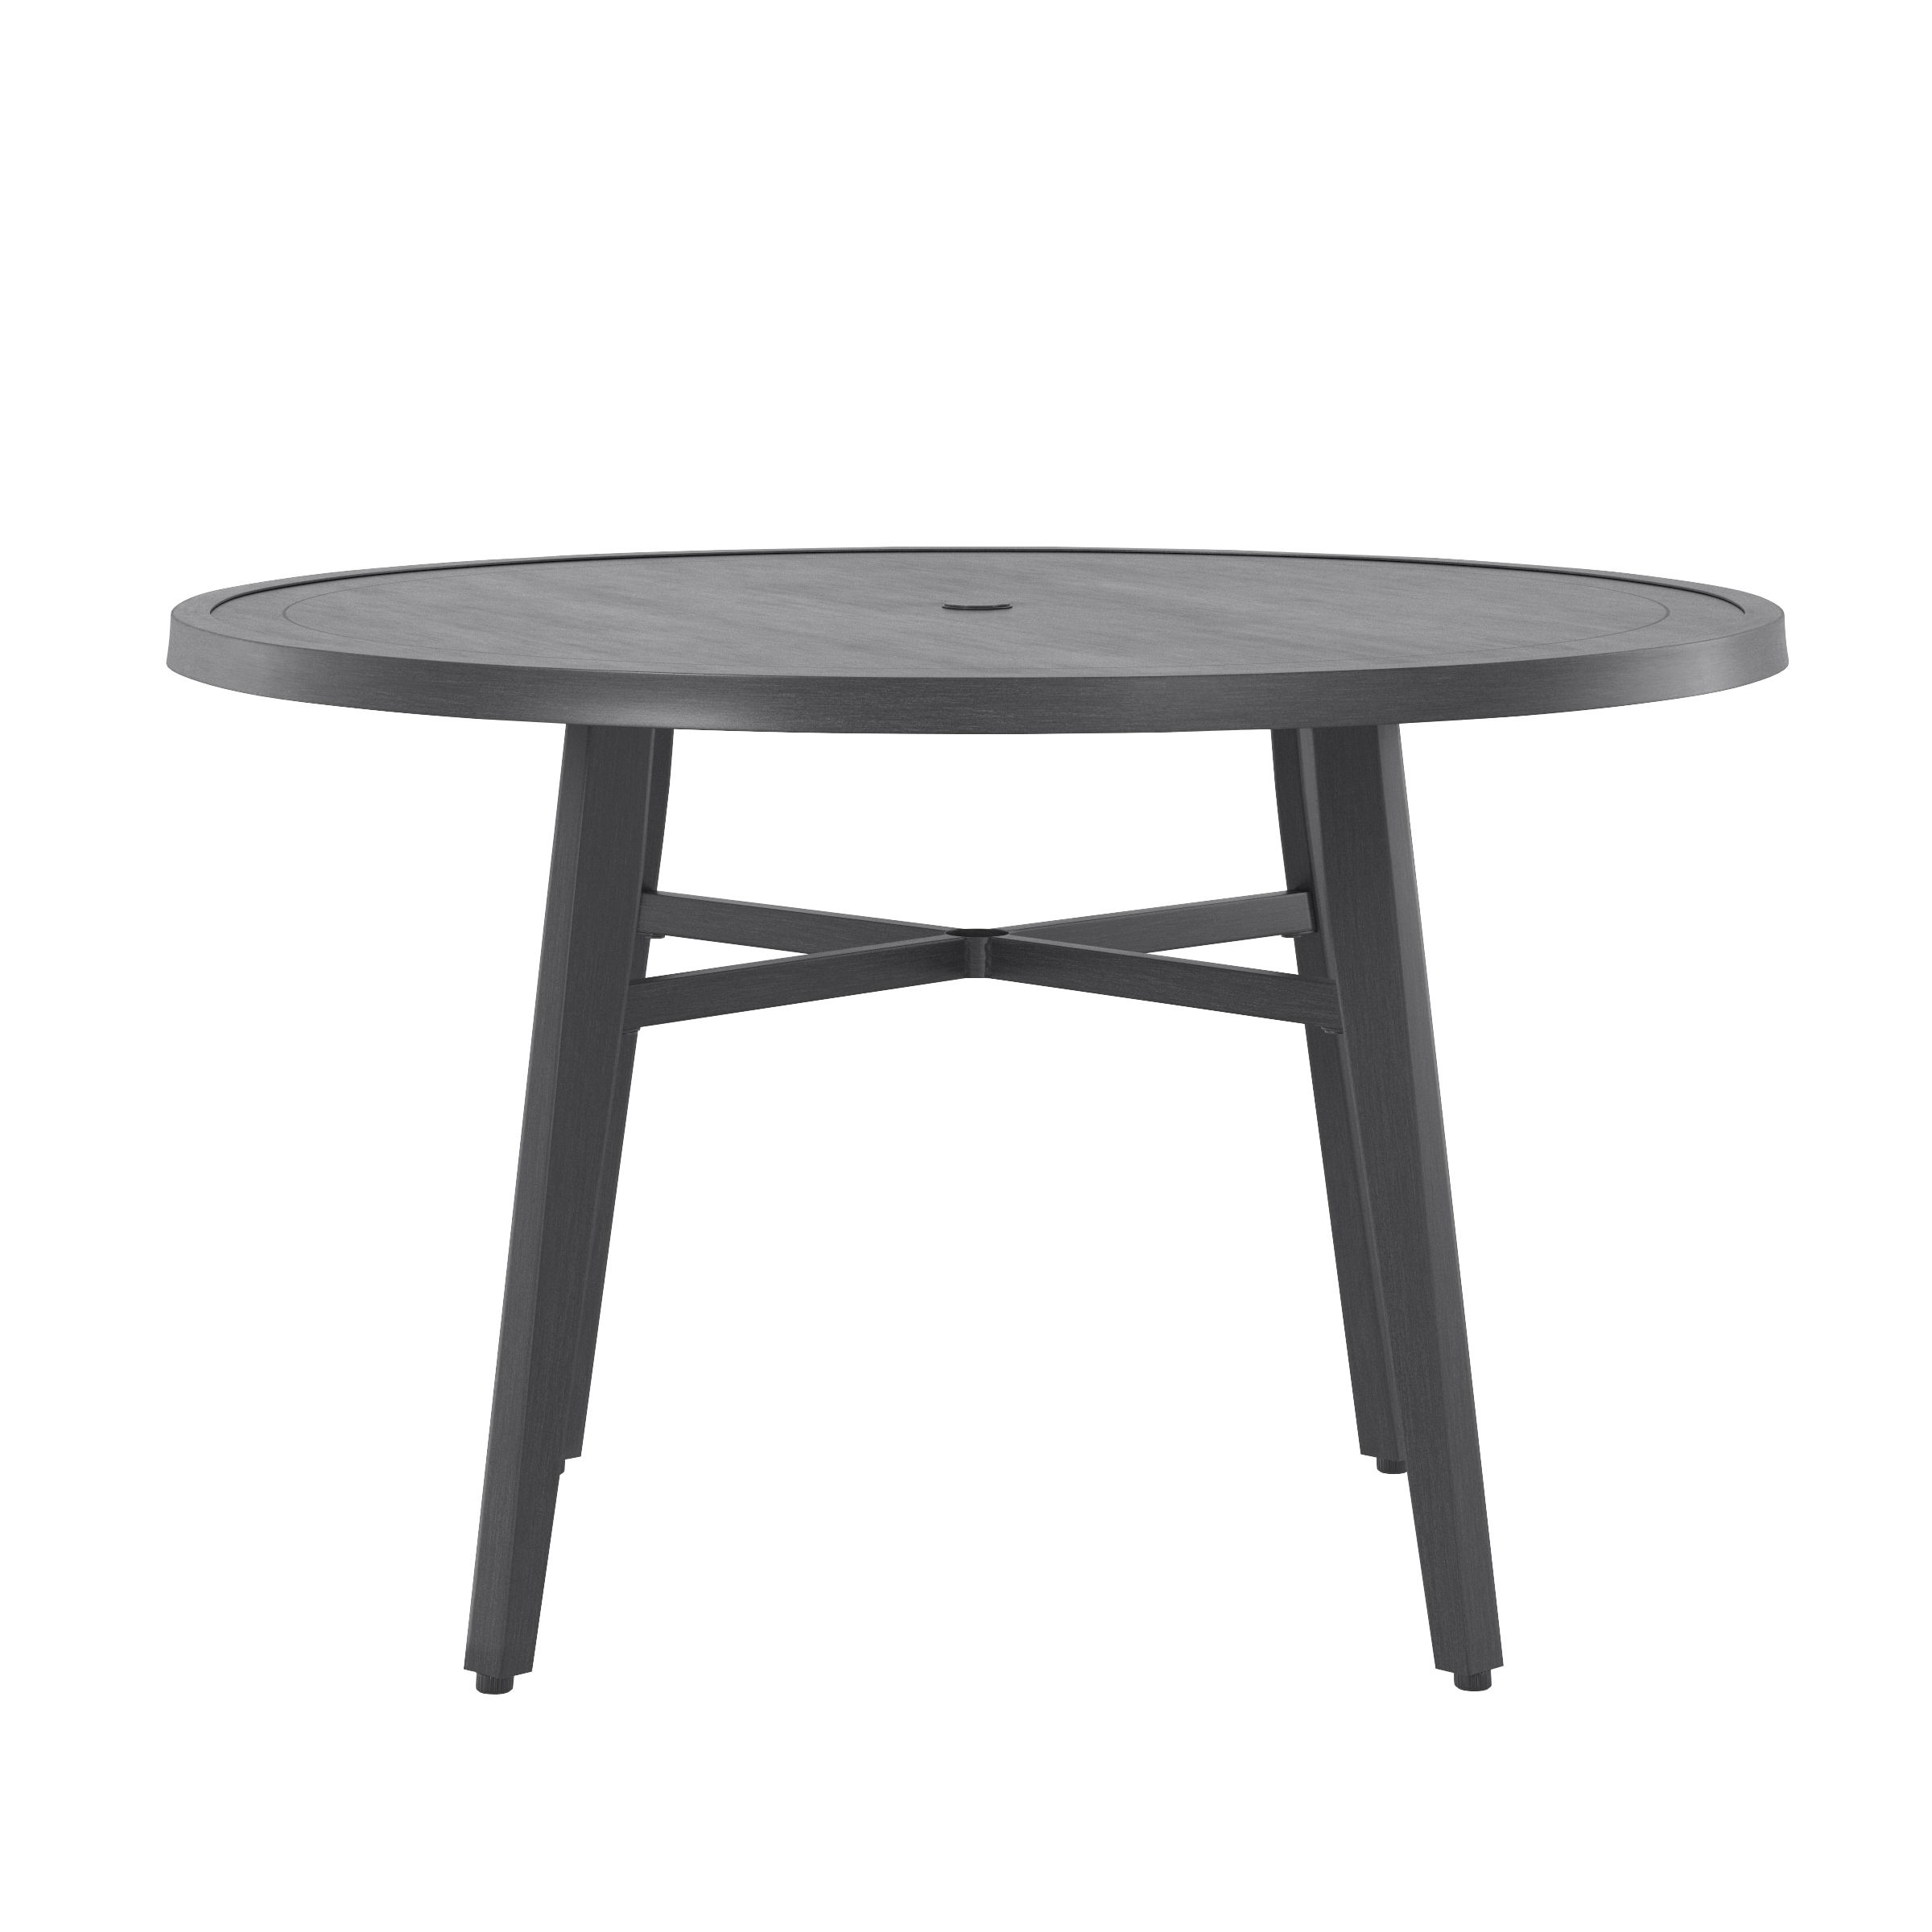 Chantilly Round Outdoor Dining Table 48-in W x 48-in L with Umbrella Hole | - Style Selections MM20-269TB